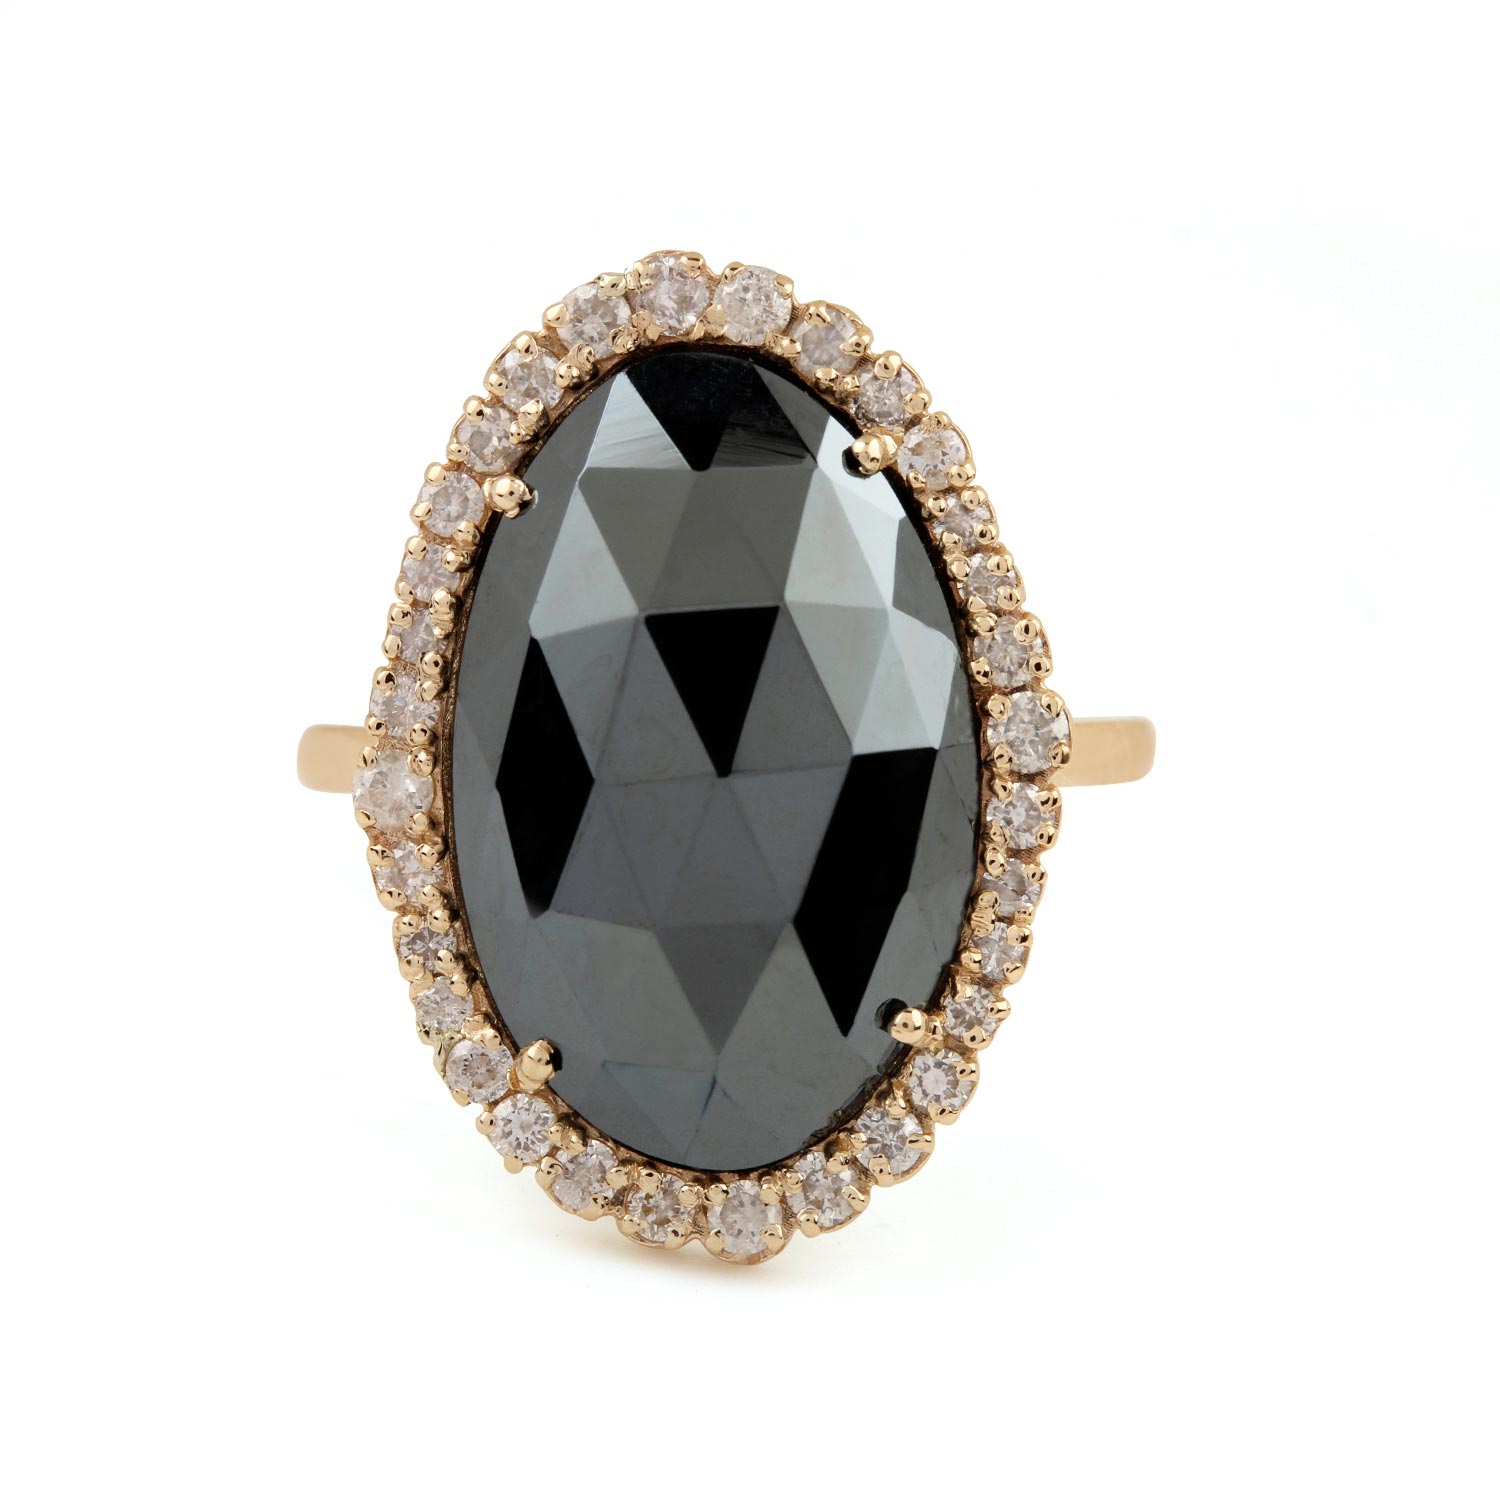 Black Spinel 14K Solid Gold Ring Pave Diamond Jewelry